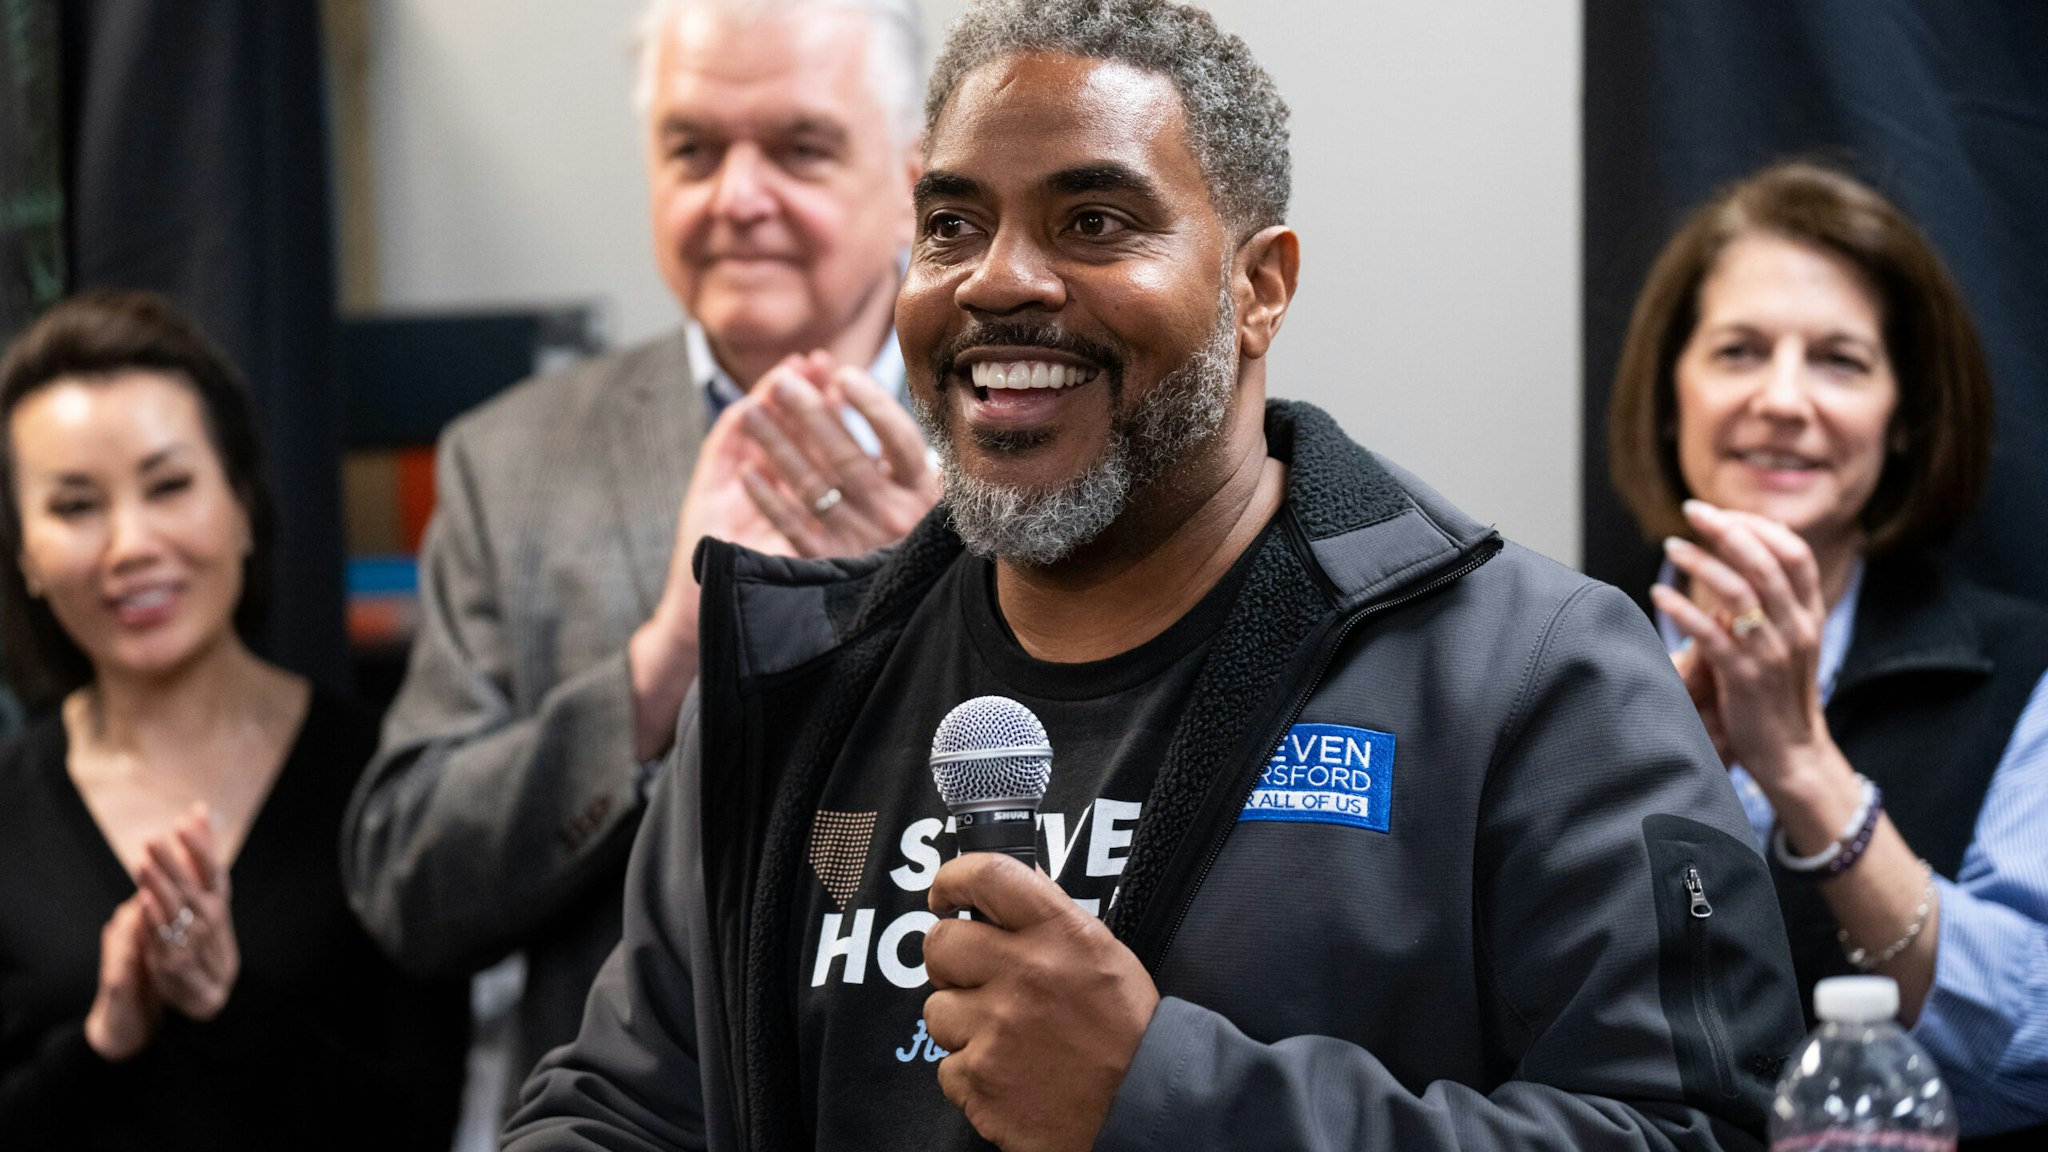 Sonya Douglass, a professor and director of the Black Education Research Center at Columbia University Teachers College, accused ex-husband Rep. Steven Horsford, D-NV, of trying to strongarm her into silence in a devastating tweet thread.